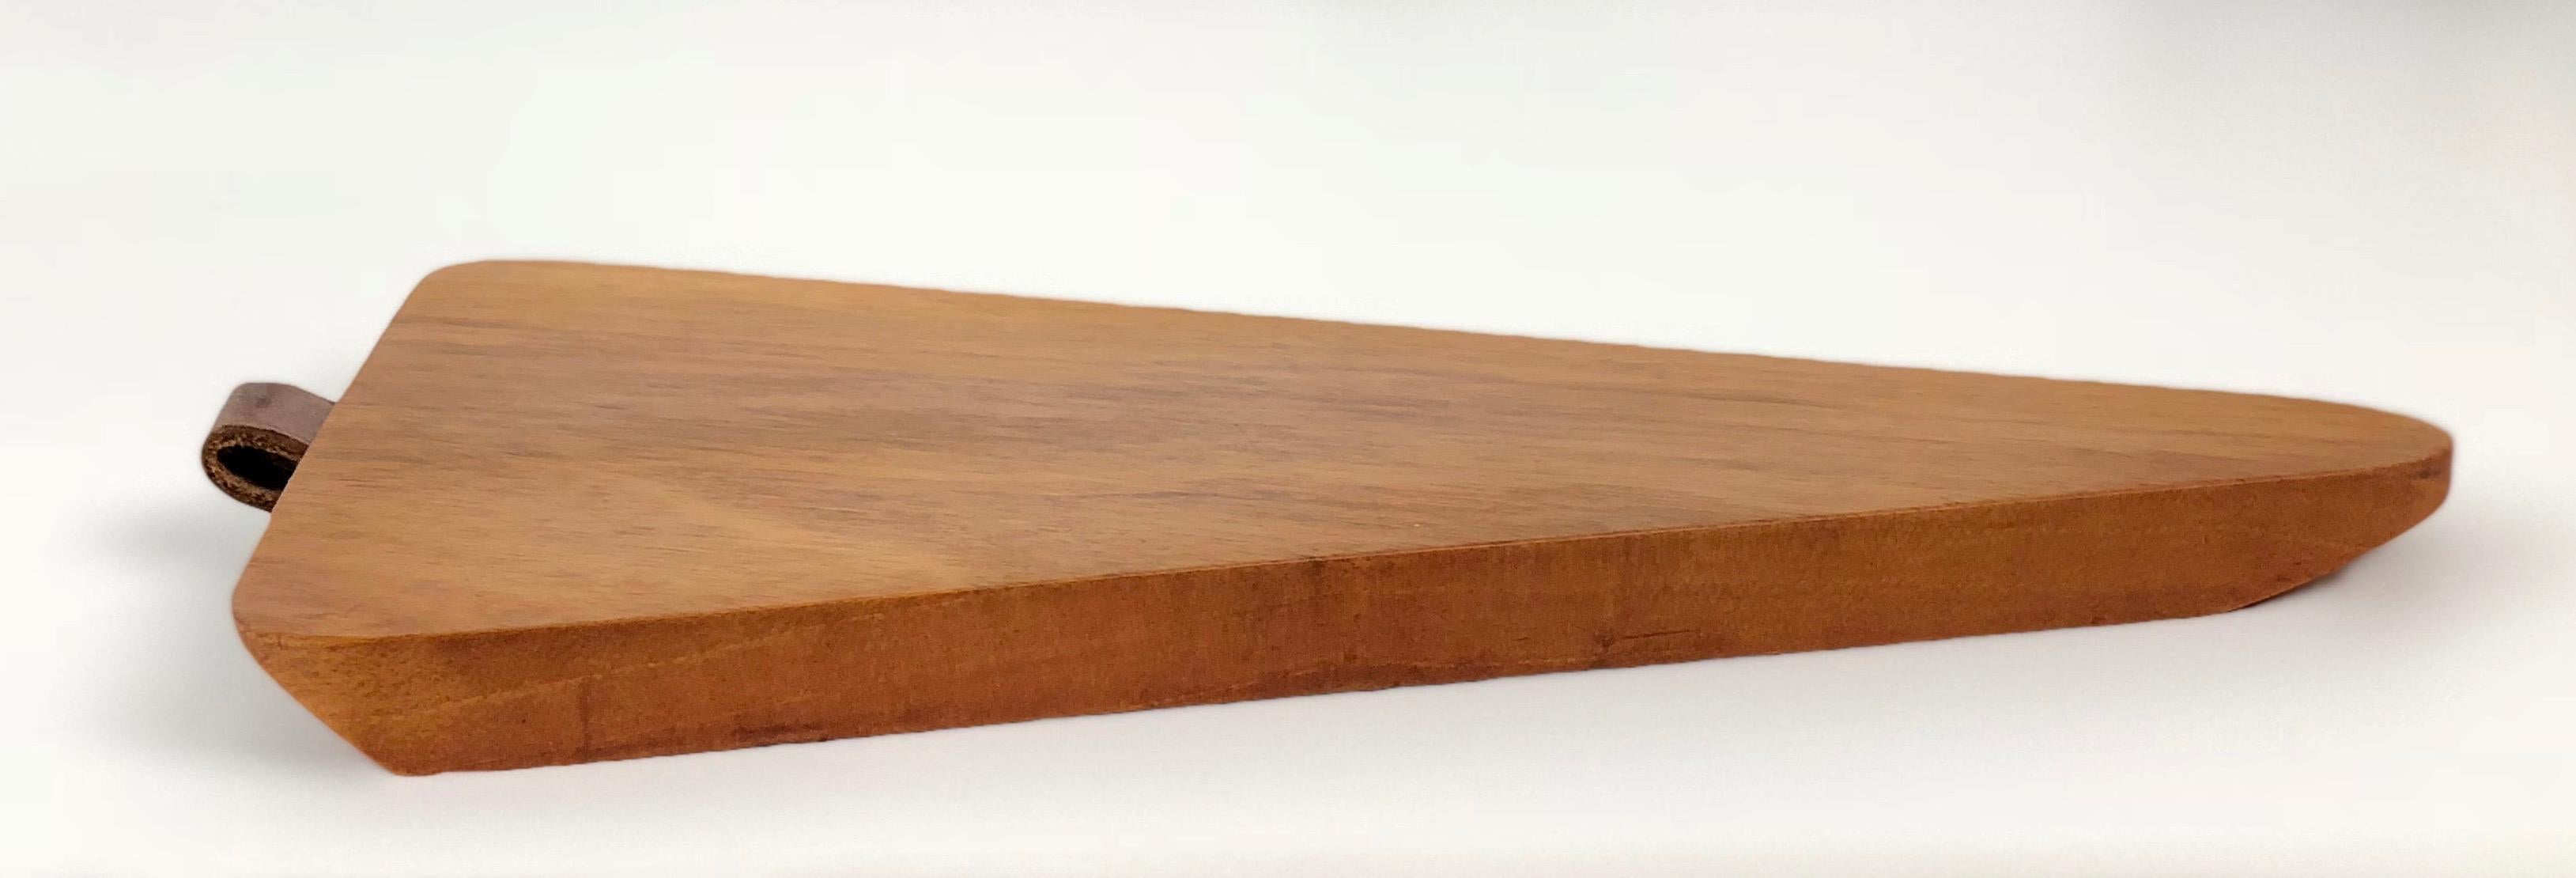 Carl Auböck Triangular Walnut Cutting Board with Amboss Knife In Good Condition For Sale In Vienna, Austria